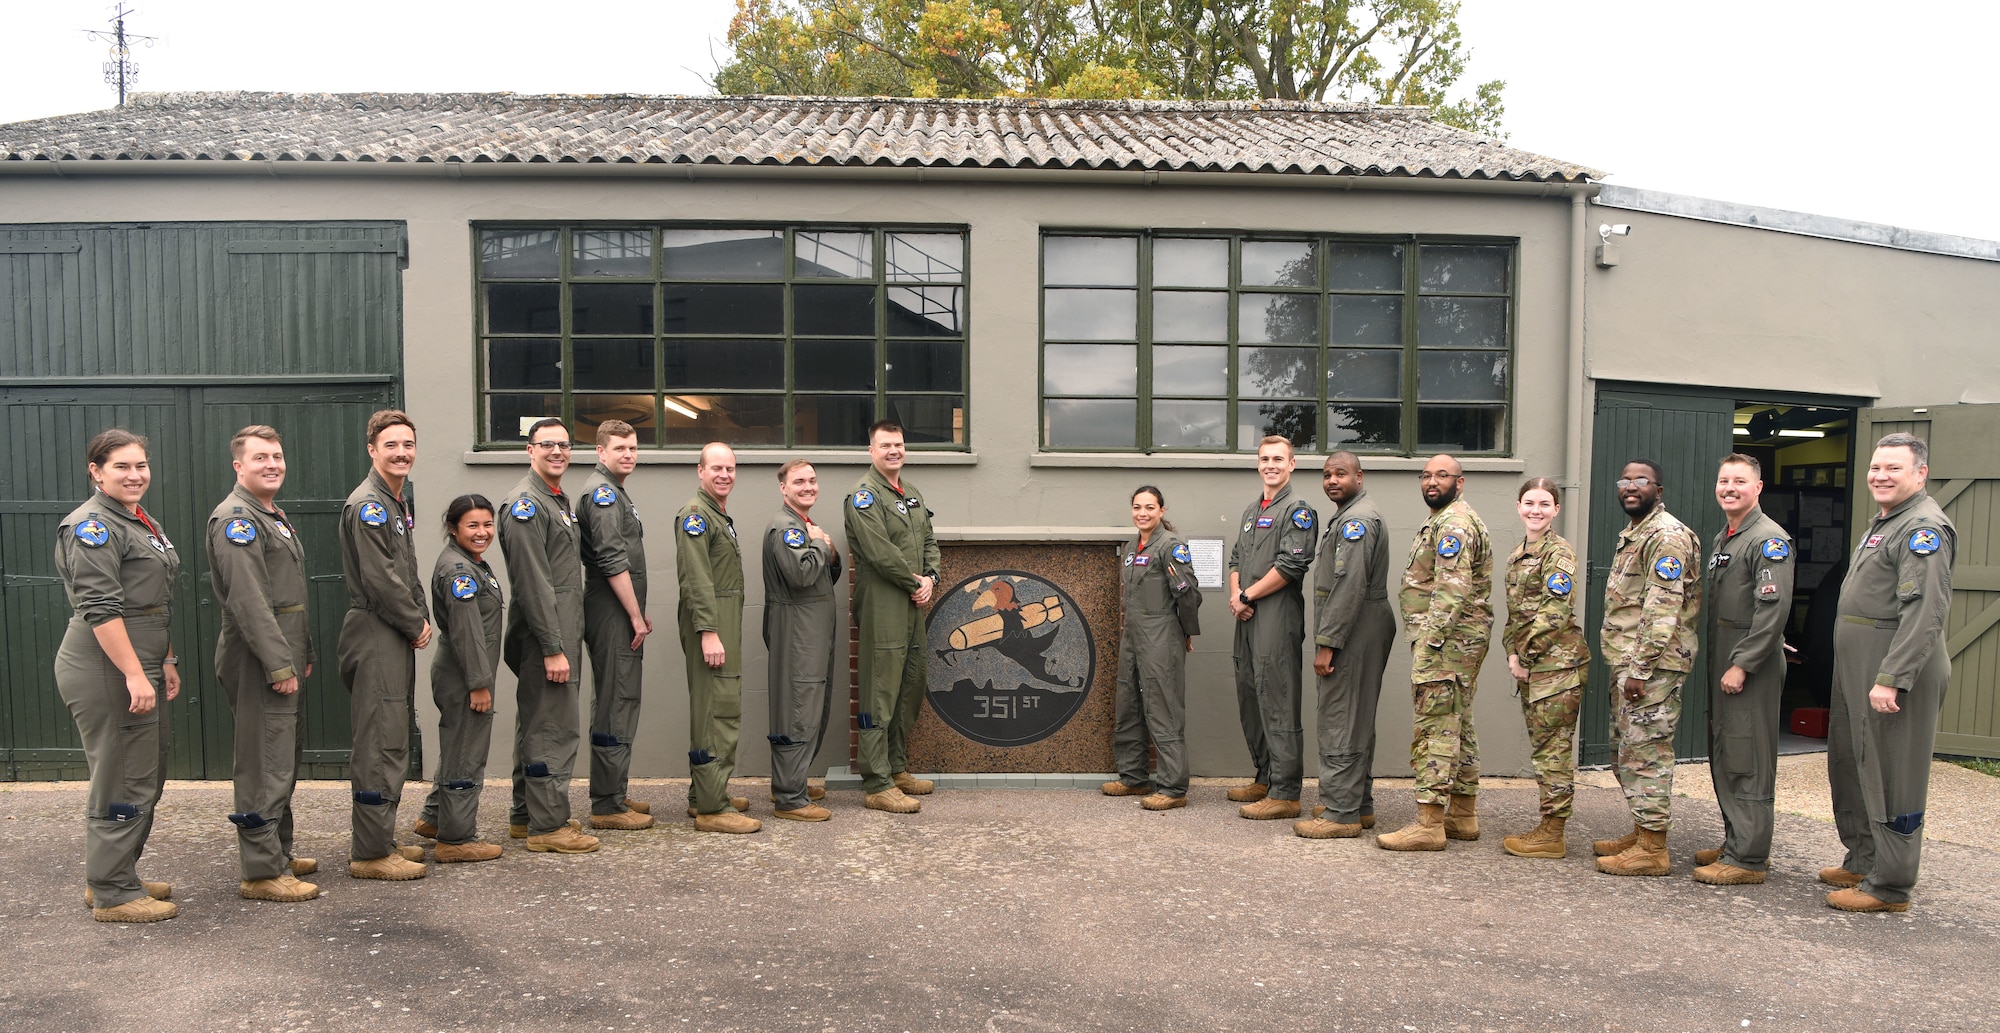 Pilots and boom operators from the 351st Air Refueling Squadron show off their newly presented patches after completing mission certification at the 100th Bomb Group Memorial Museum at Thorpe Abbotts, England, Oct. 14, 2022. Thorpe Abbotts was home to the original 351st Bomb Squadron and 100th Bomb Group during World War II. The “Buzzard” patch is a heritage patch and only those who have completed MCT can wear the patch on Fridays. Two squadron aviation resource management Airmen were also presented a patch after completing their training on a variety of tasks including keeping vital flight records and orders. (U.S. Air Force photo by Karen Abeyasekere)